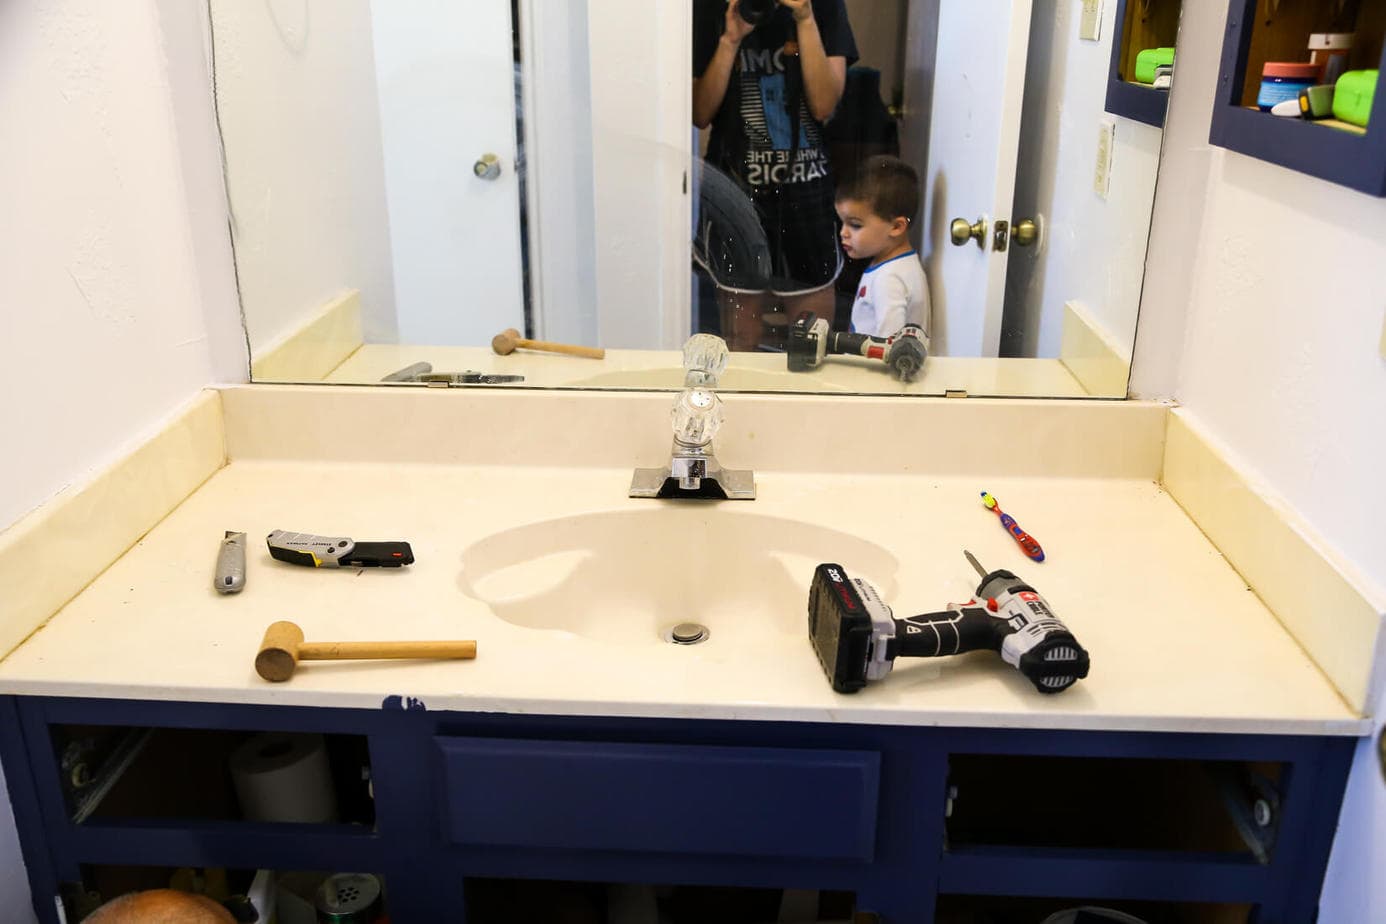 How to replace an ugly bathroom counter - it's quick, easy, and surprisingly affordable! Easy, budget-friendly option for getting a new counter in your bathroom without calling in a pro.